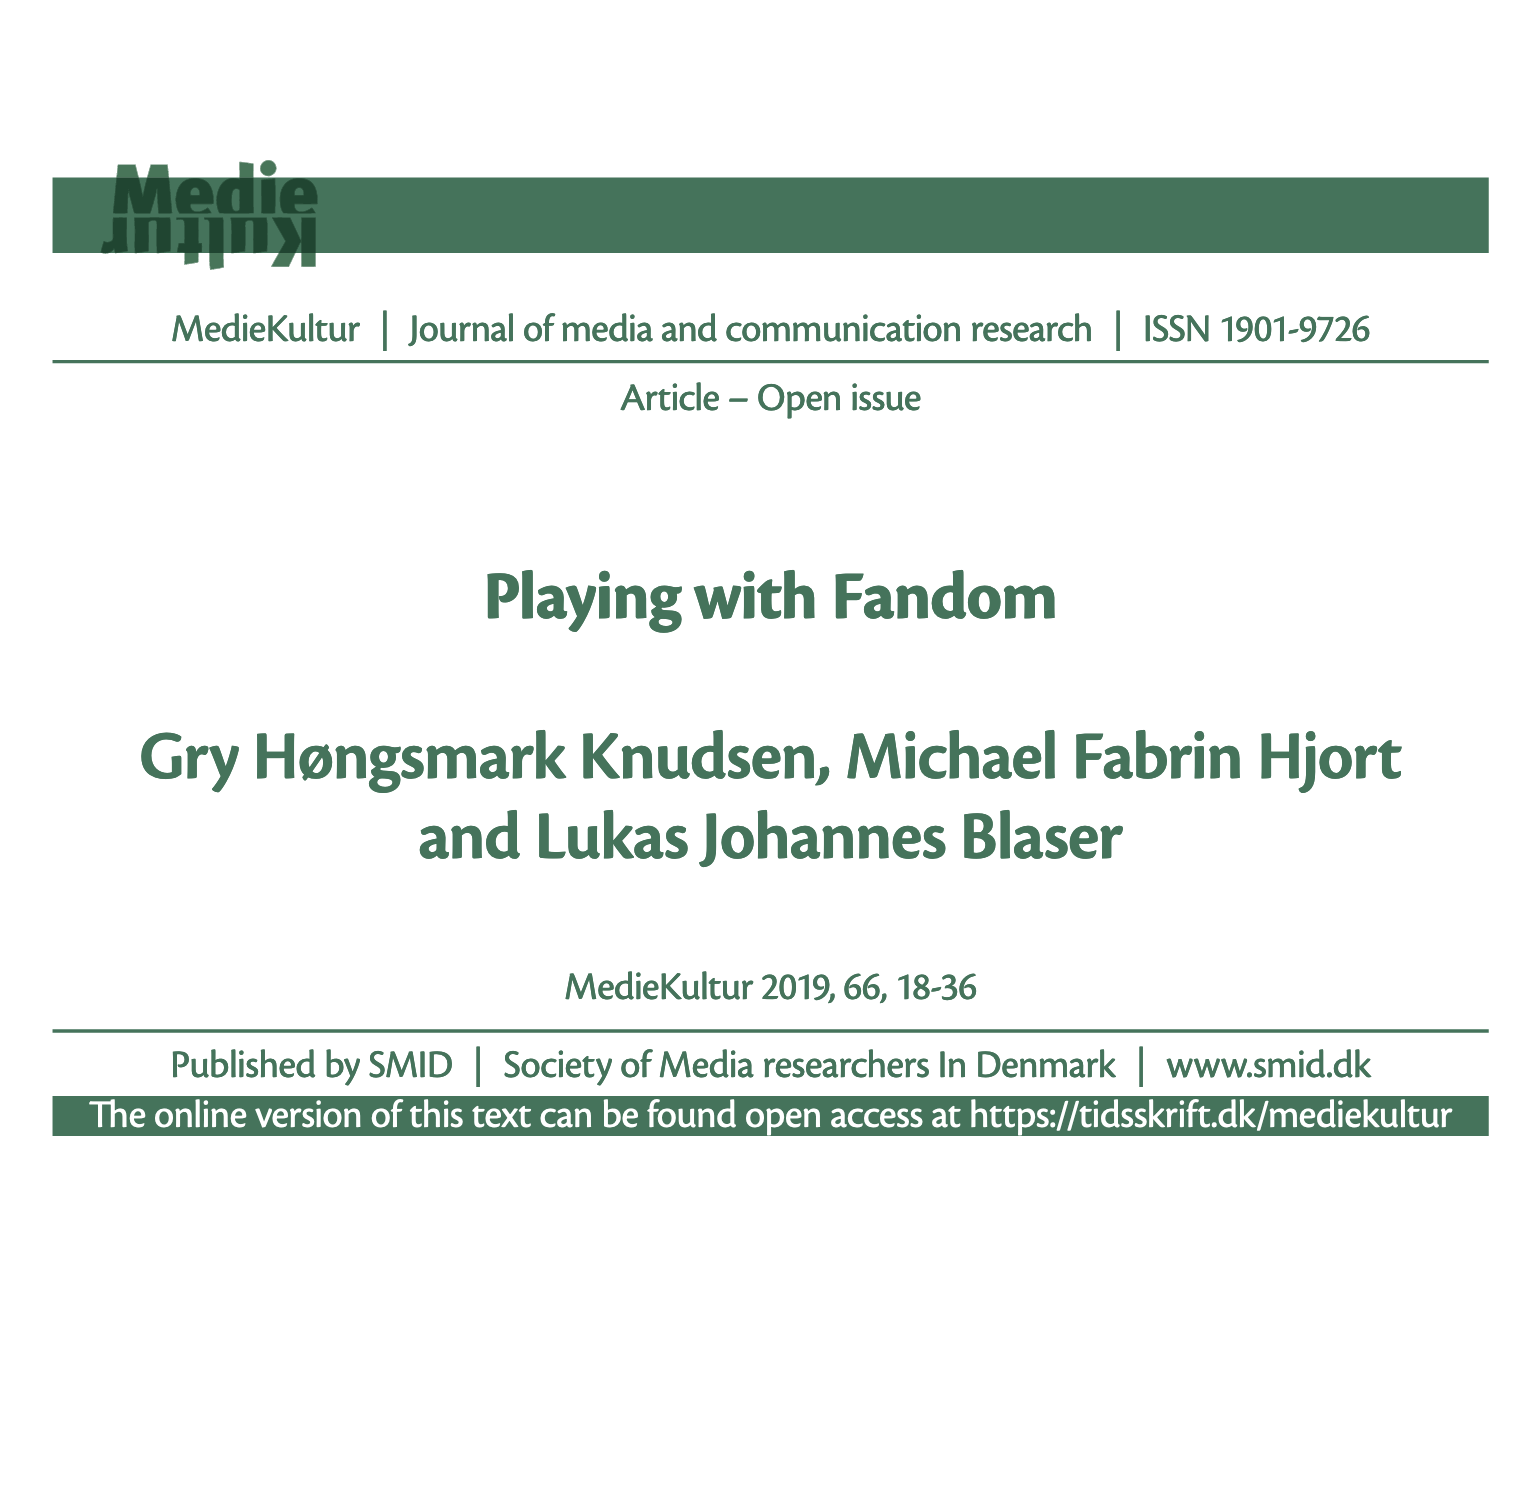 'Playing with Fandom' – an scientific articles in MedieKultur